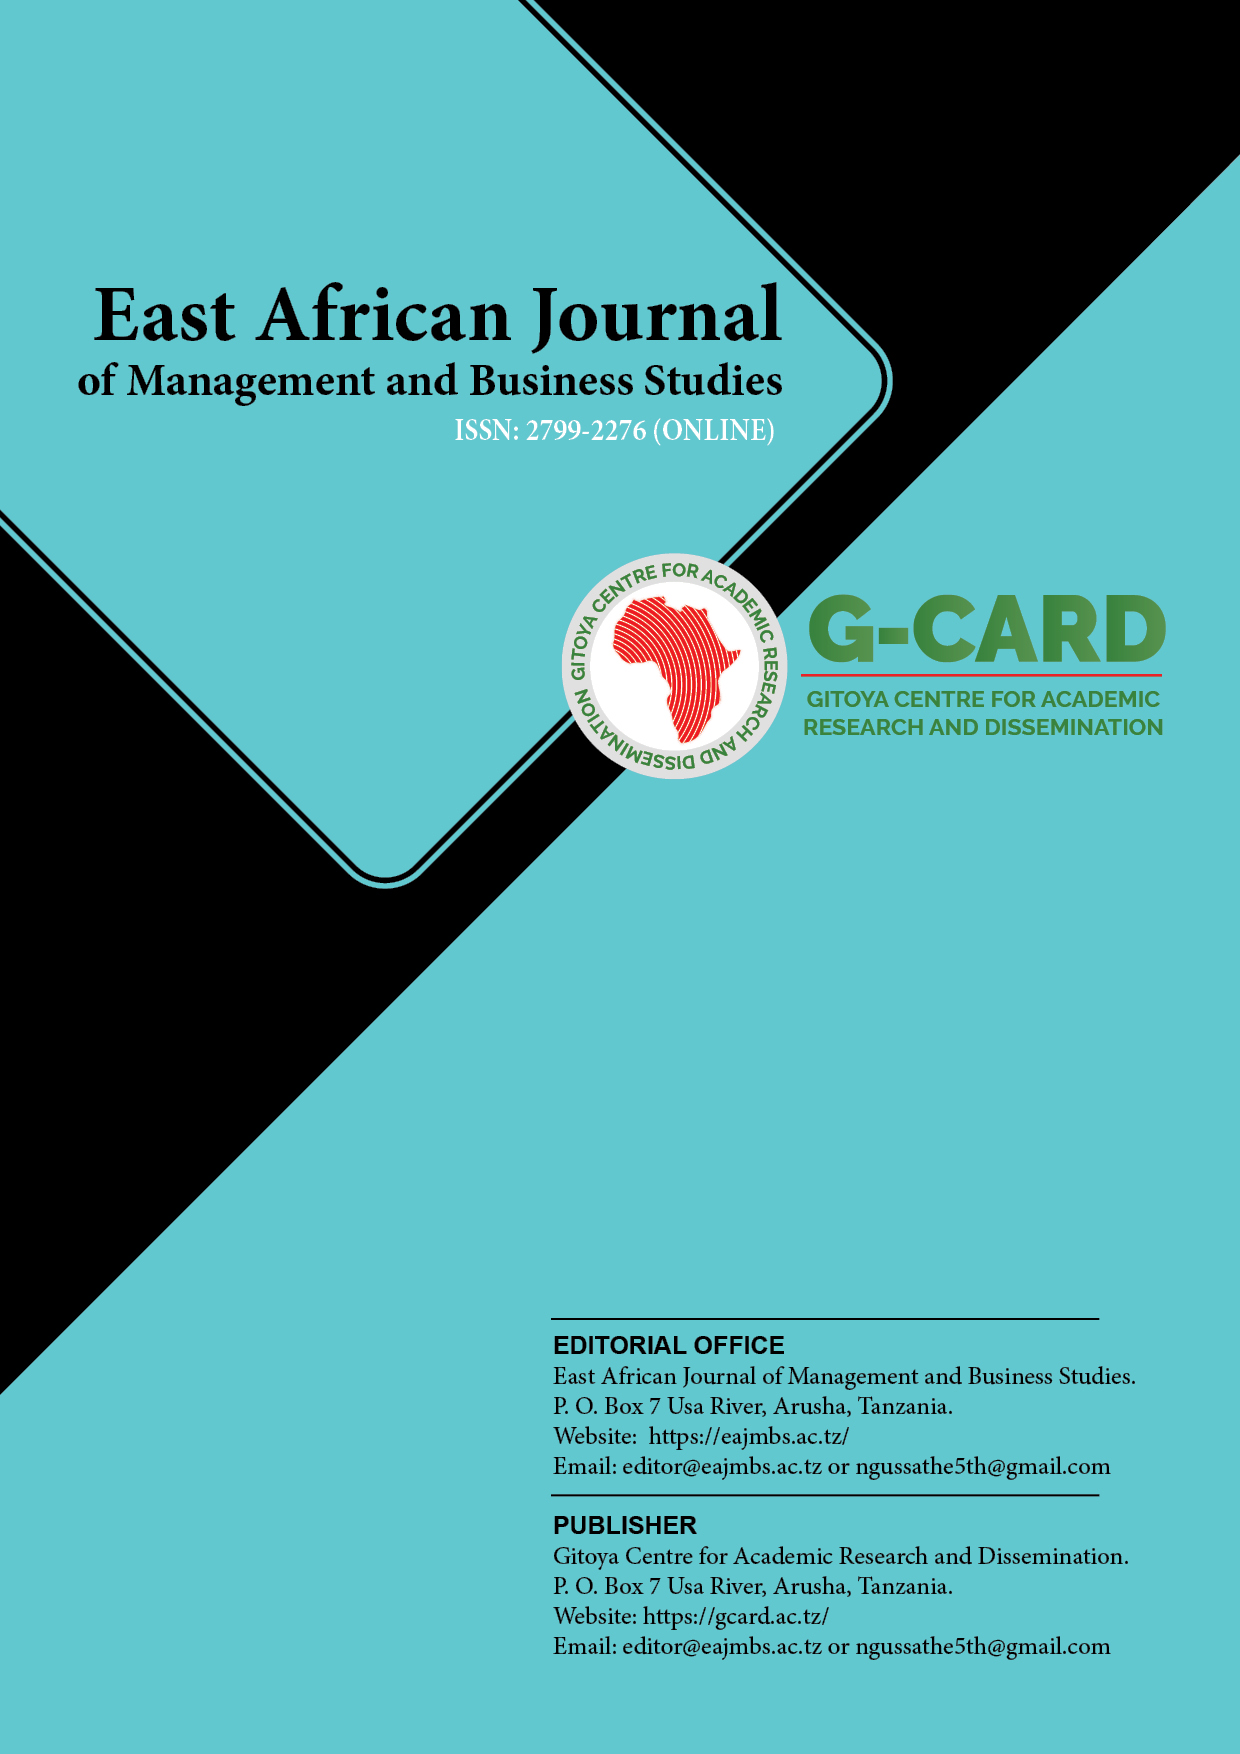 East African Journal of Management and Business Studies